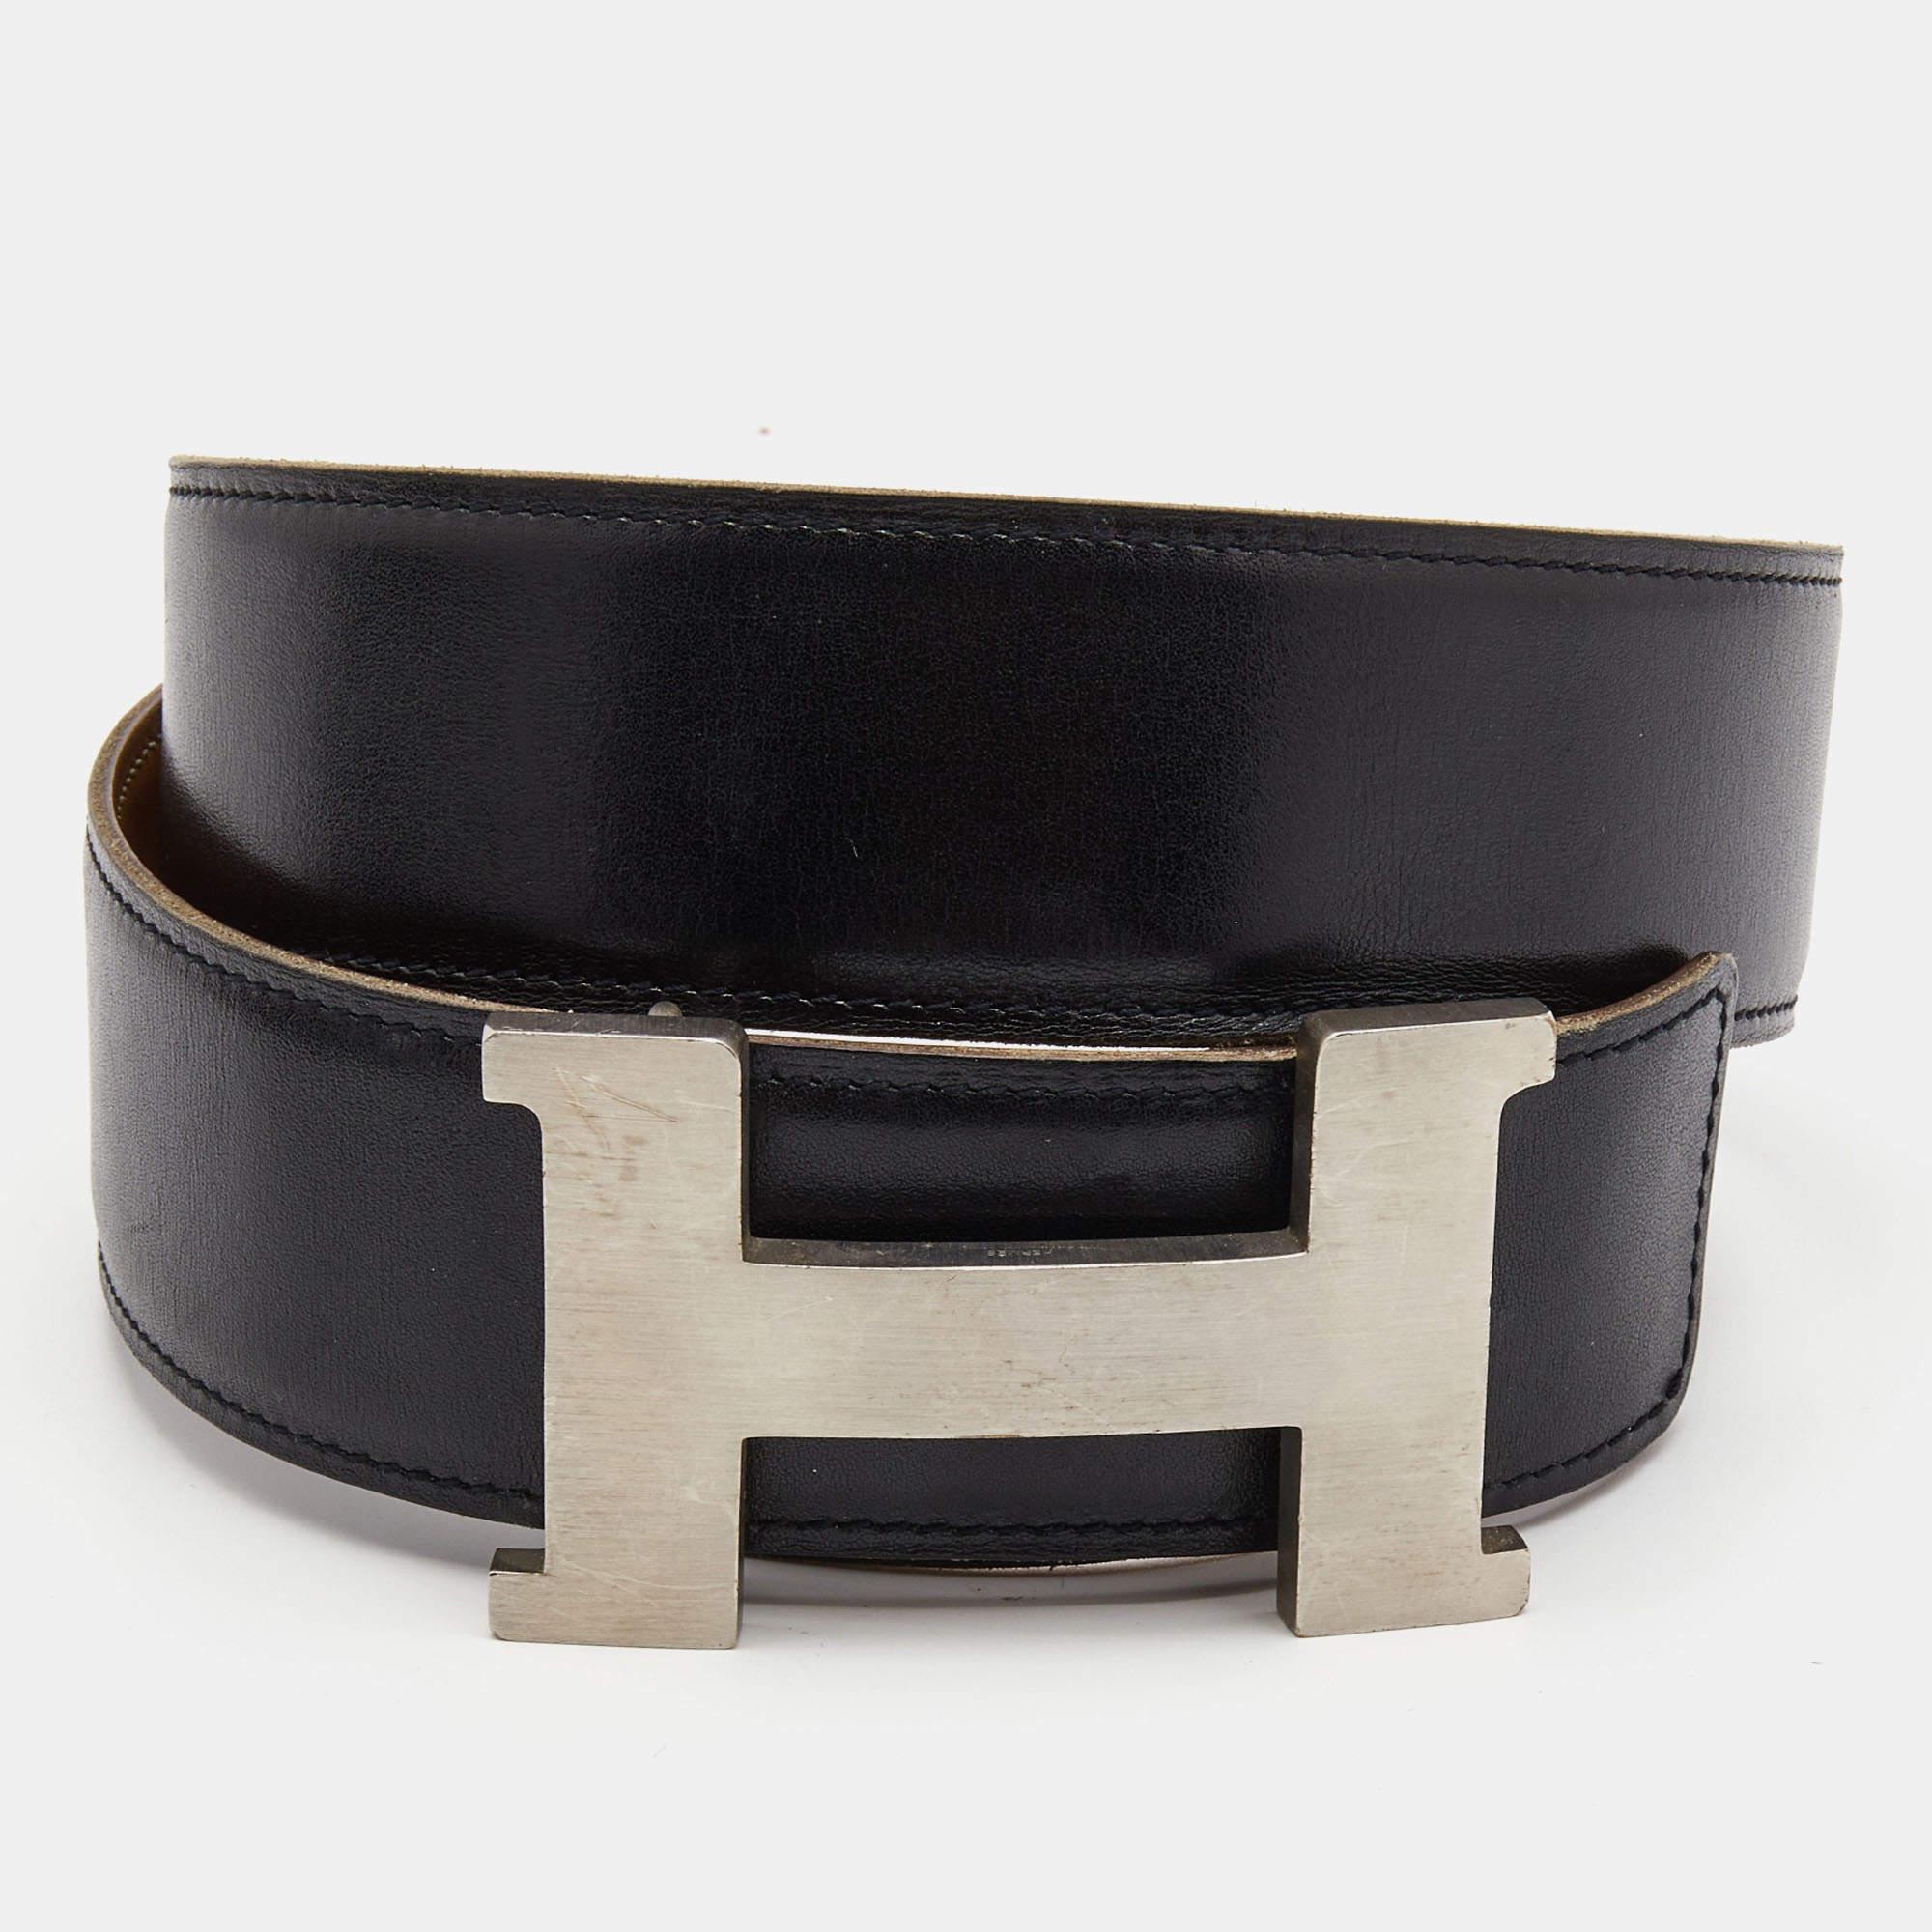 A celebrated design from the range of accessories by Hermès is their H buckle belts. They are worn by celebrities and fashion lovers around the world. Here, we have a reversible version, made from Box Calf and Swift leather with Hermès gold on one